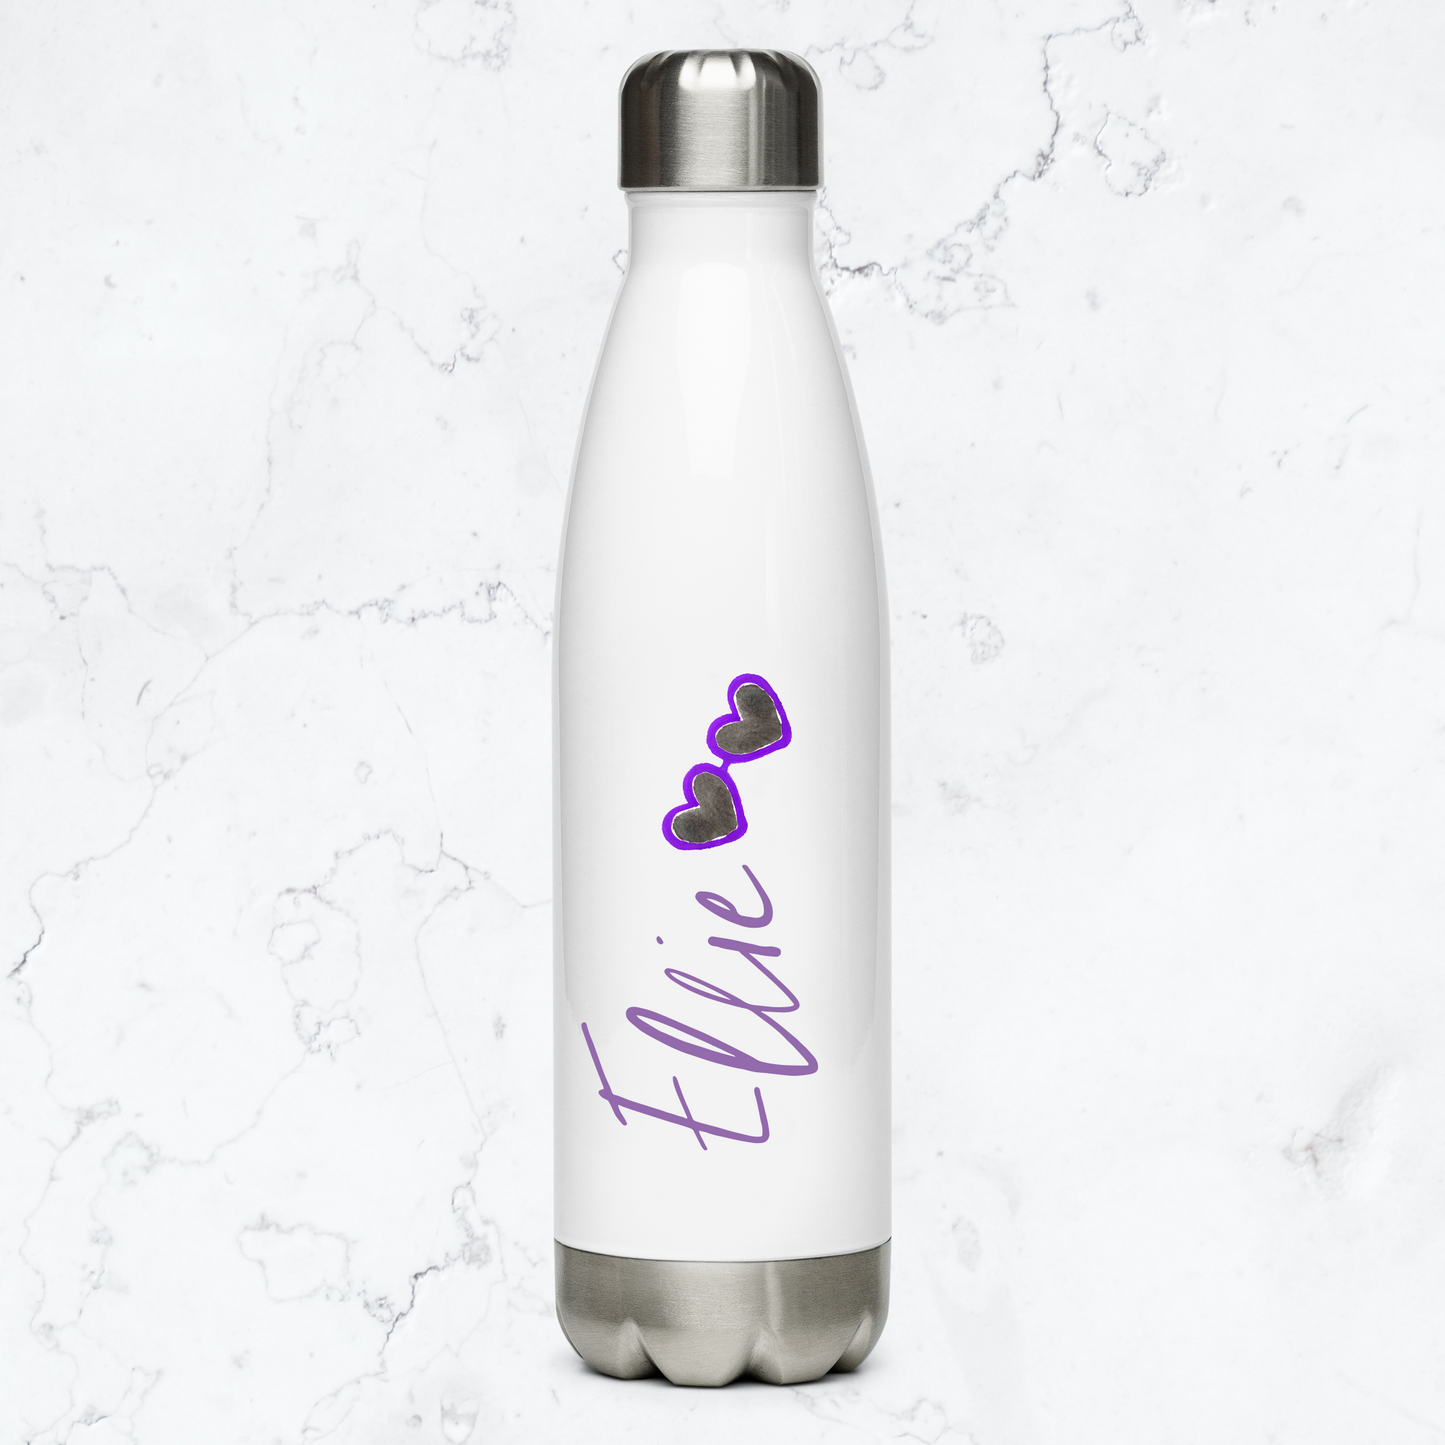 Personalized Name or Monogram Stainless Steel Water Bottle